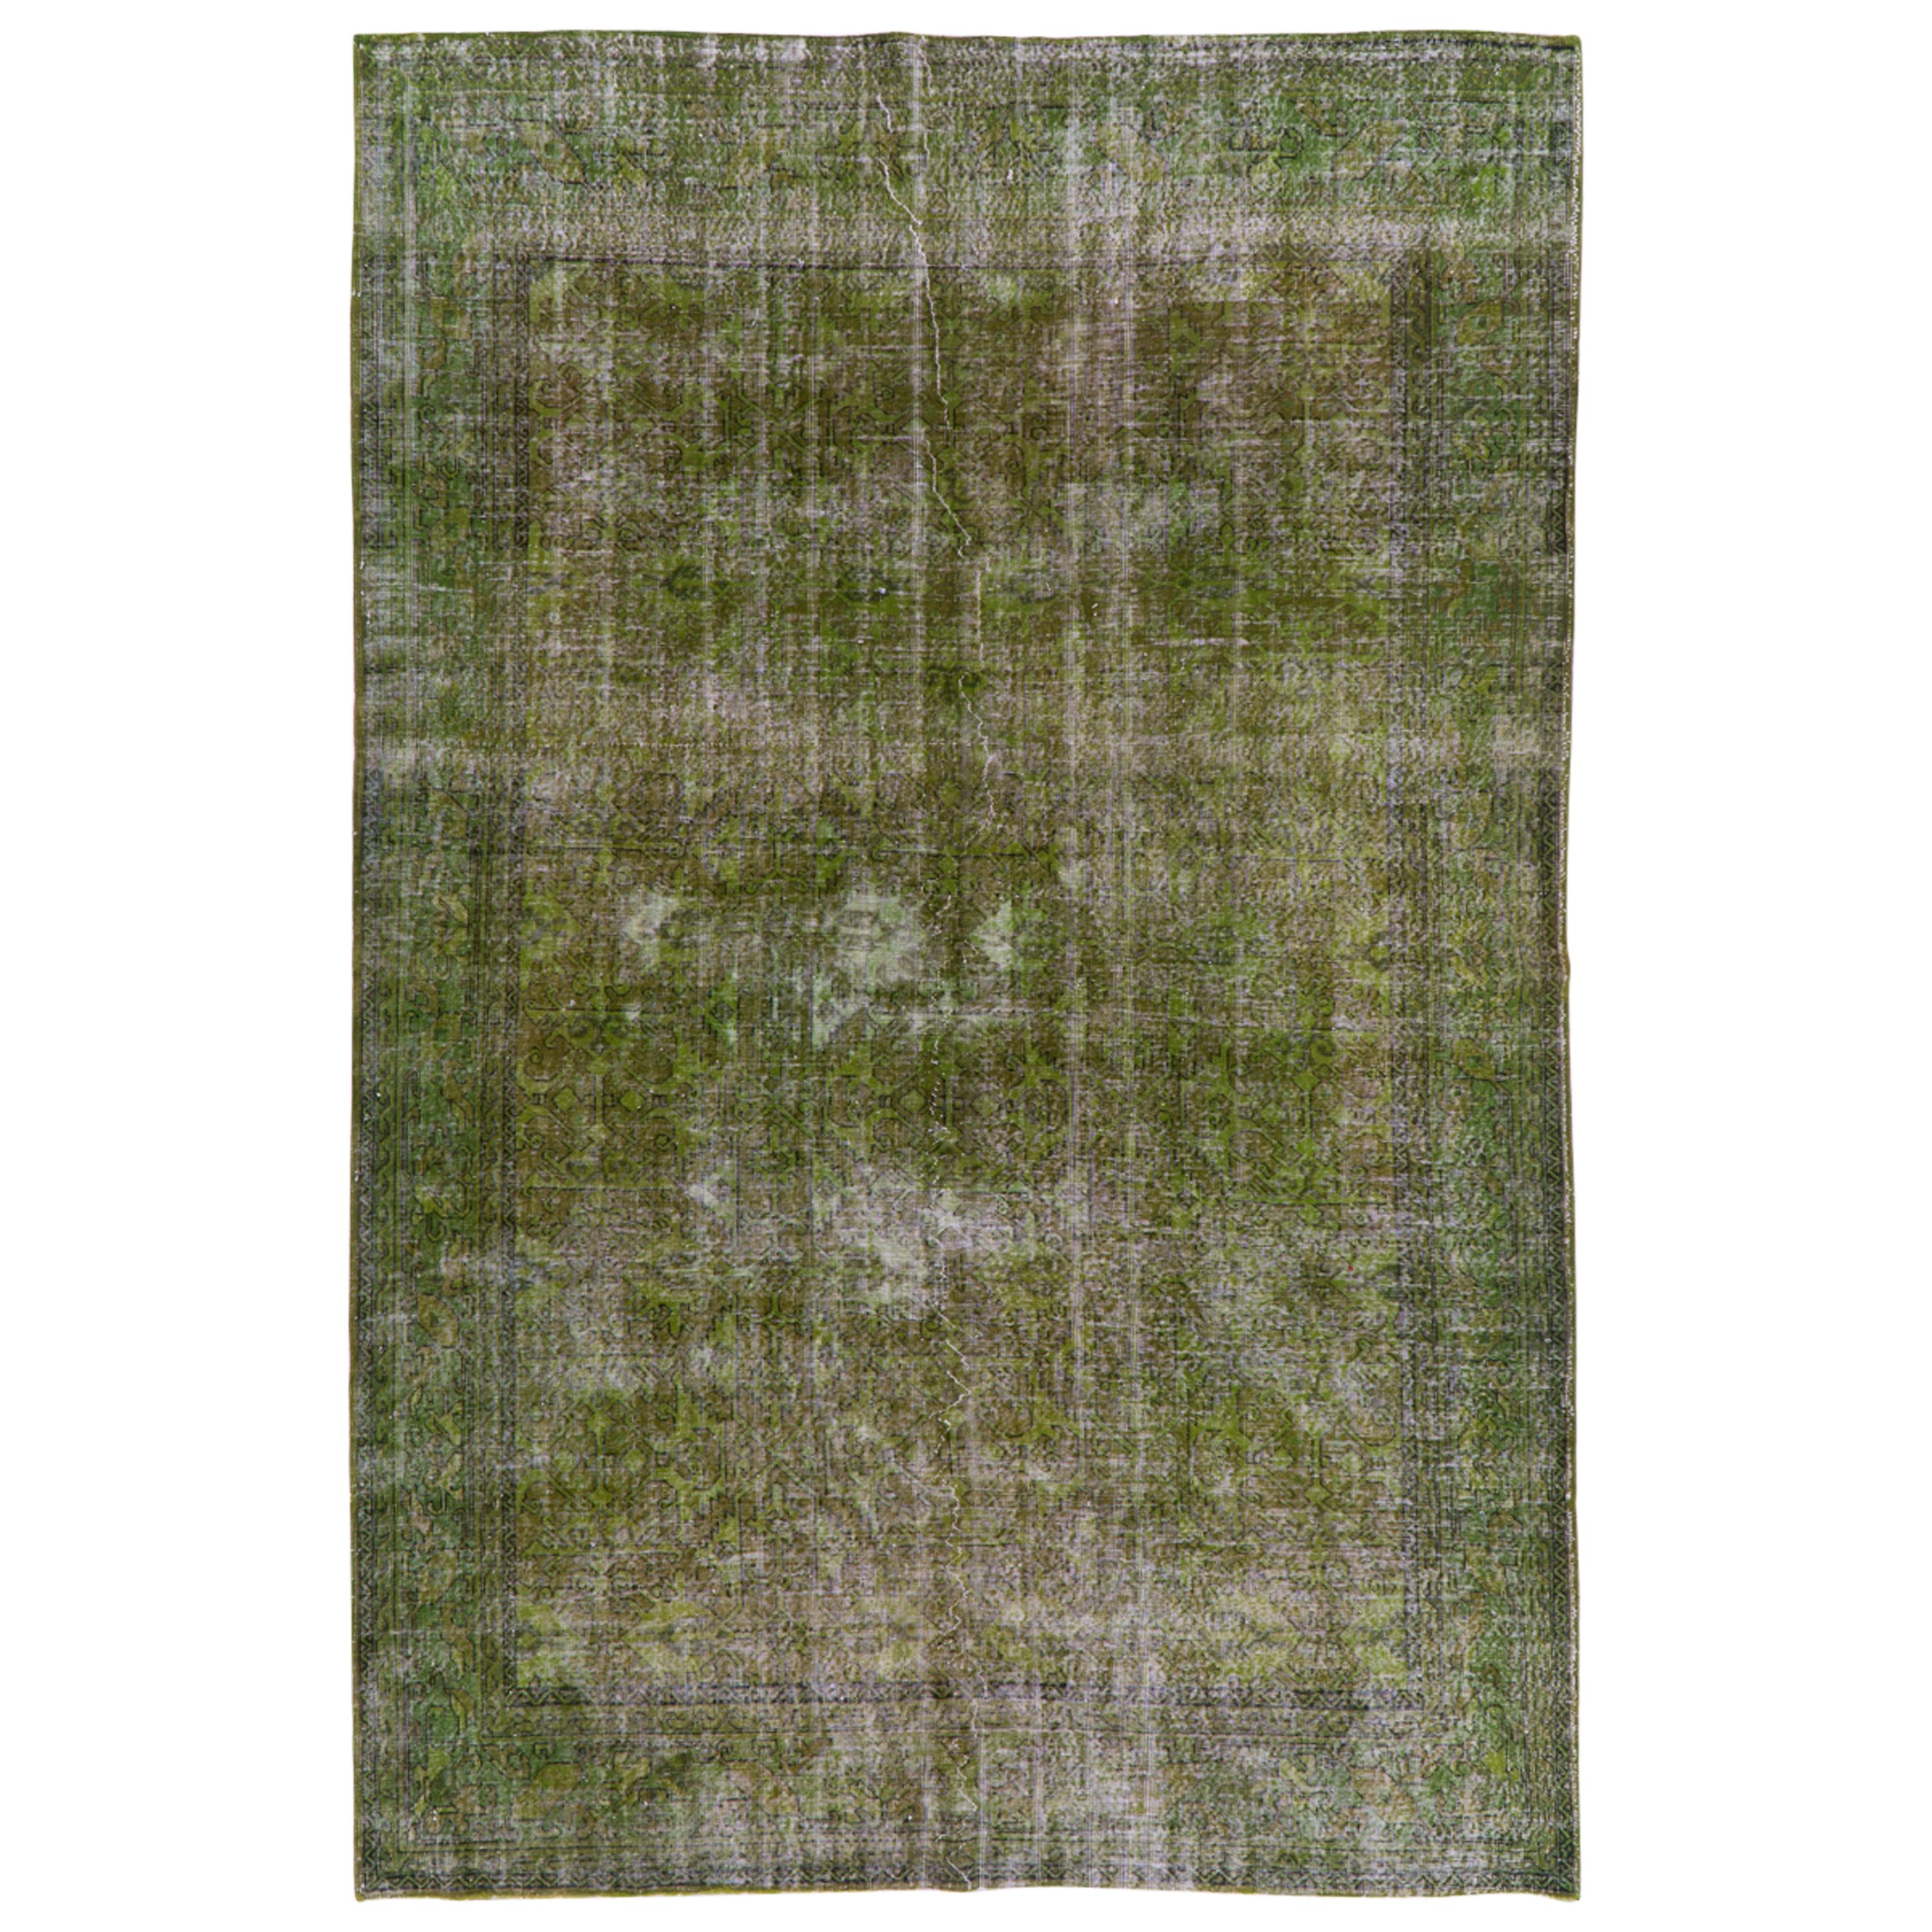 7.3x10.7 Ft Distressed Vintage Area Rug Over-Dyed in Green for Modern Home Decor